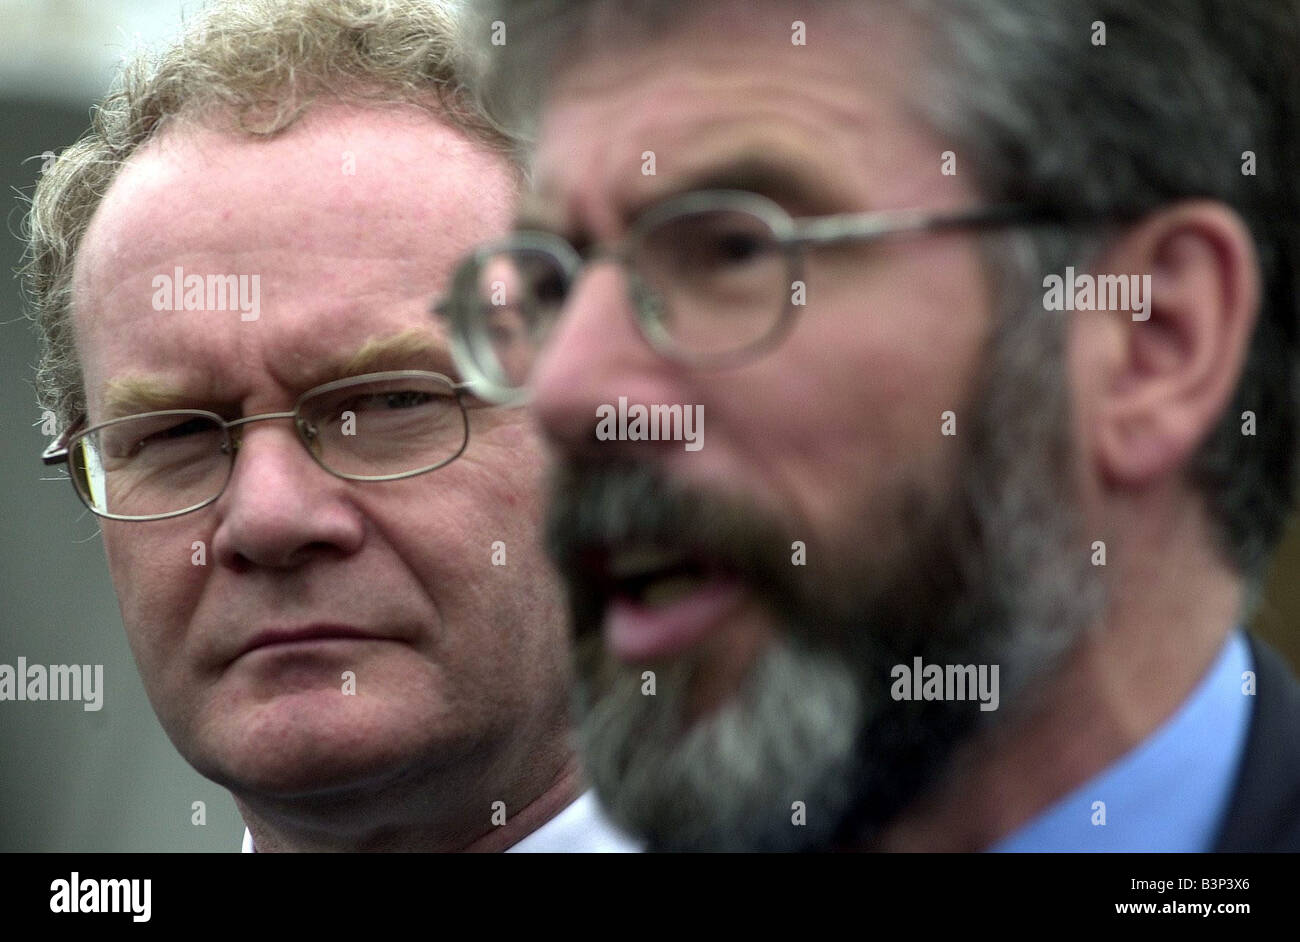 Pro Agreement Summit At Hillsborough Castle July 2002 Sinn Fein s Martin McGuinness and Gerry Adams speaking outside Hillsborough Castle before meeting Prime Ministers Tony Blair and Bertie Ahern Stock Photo